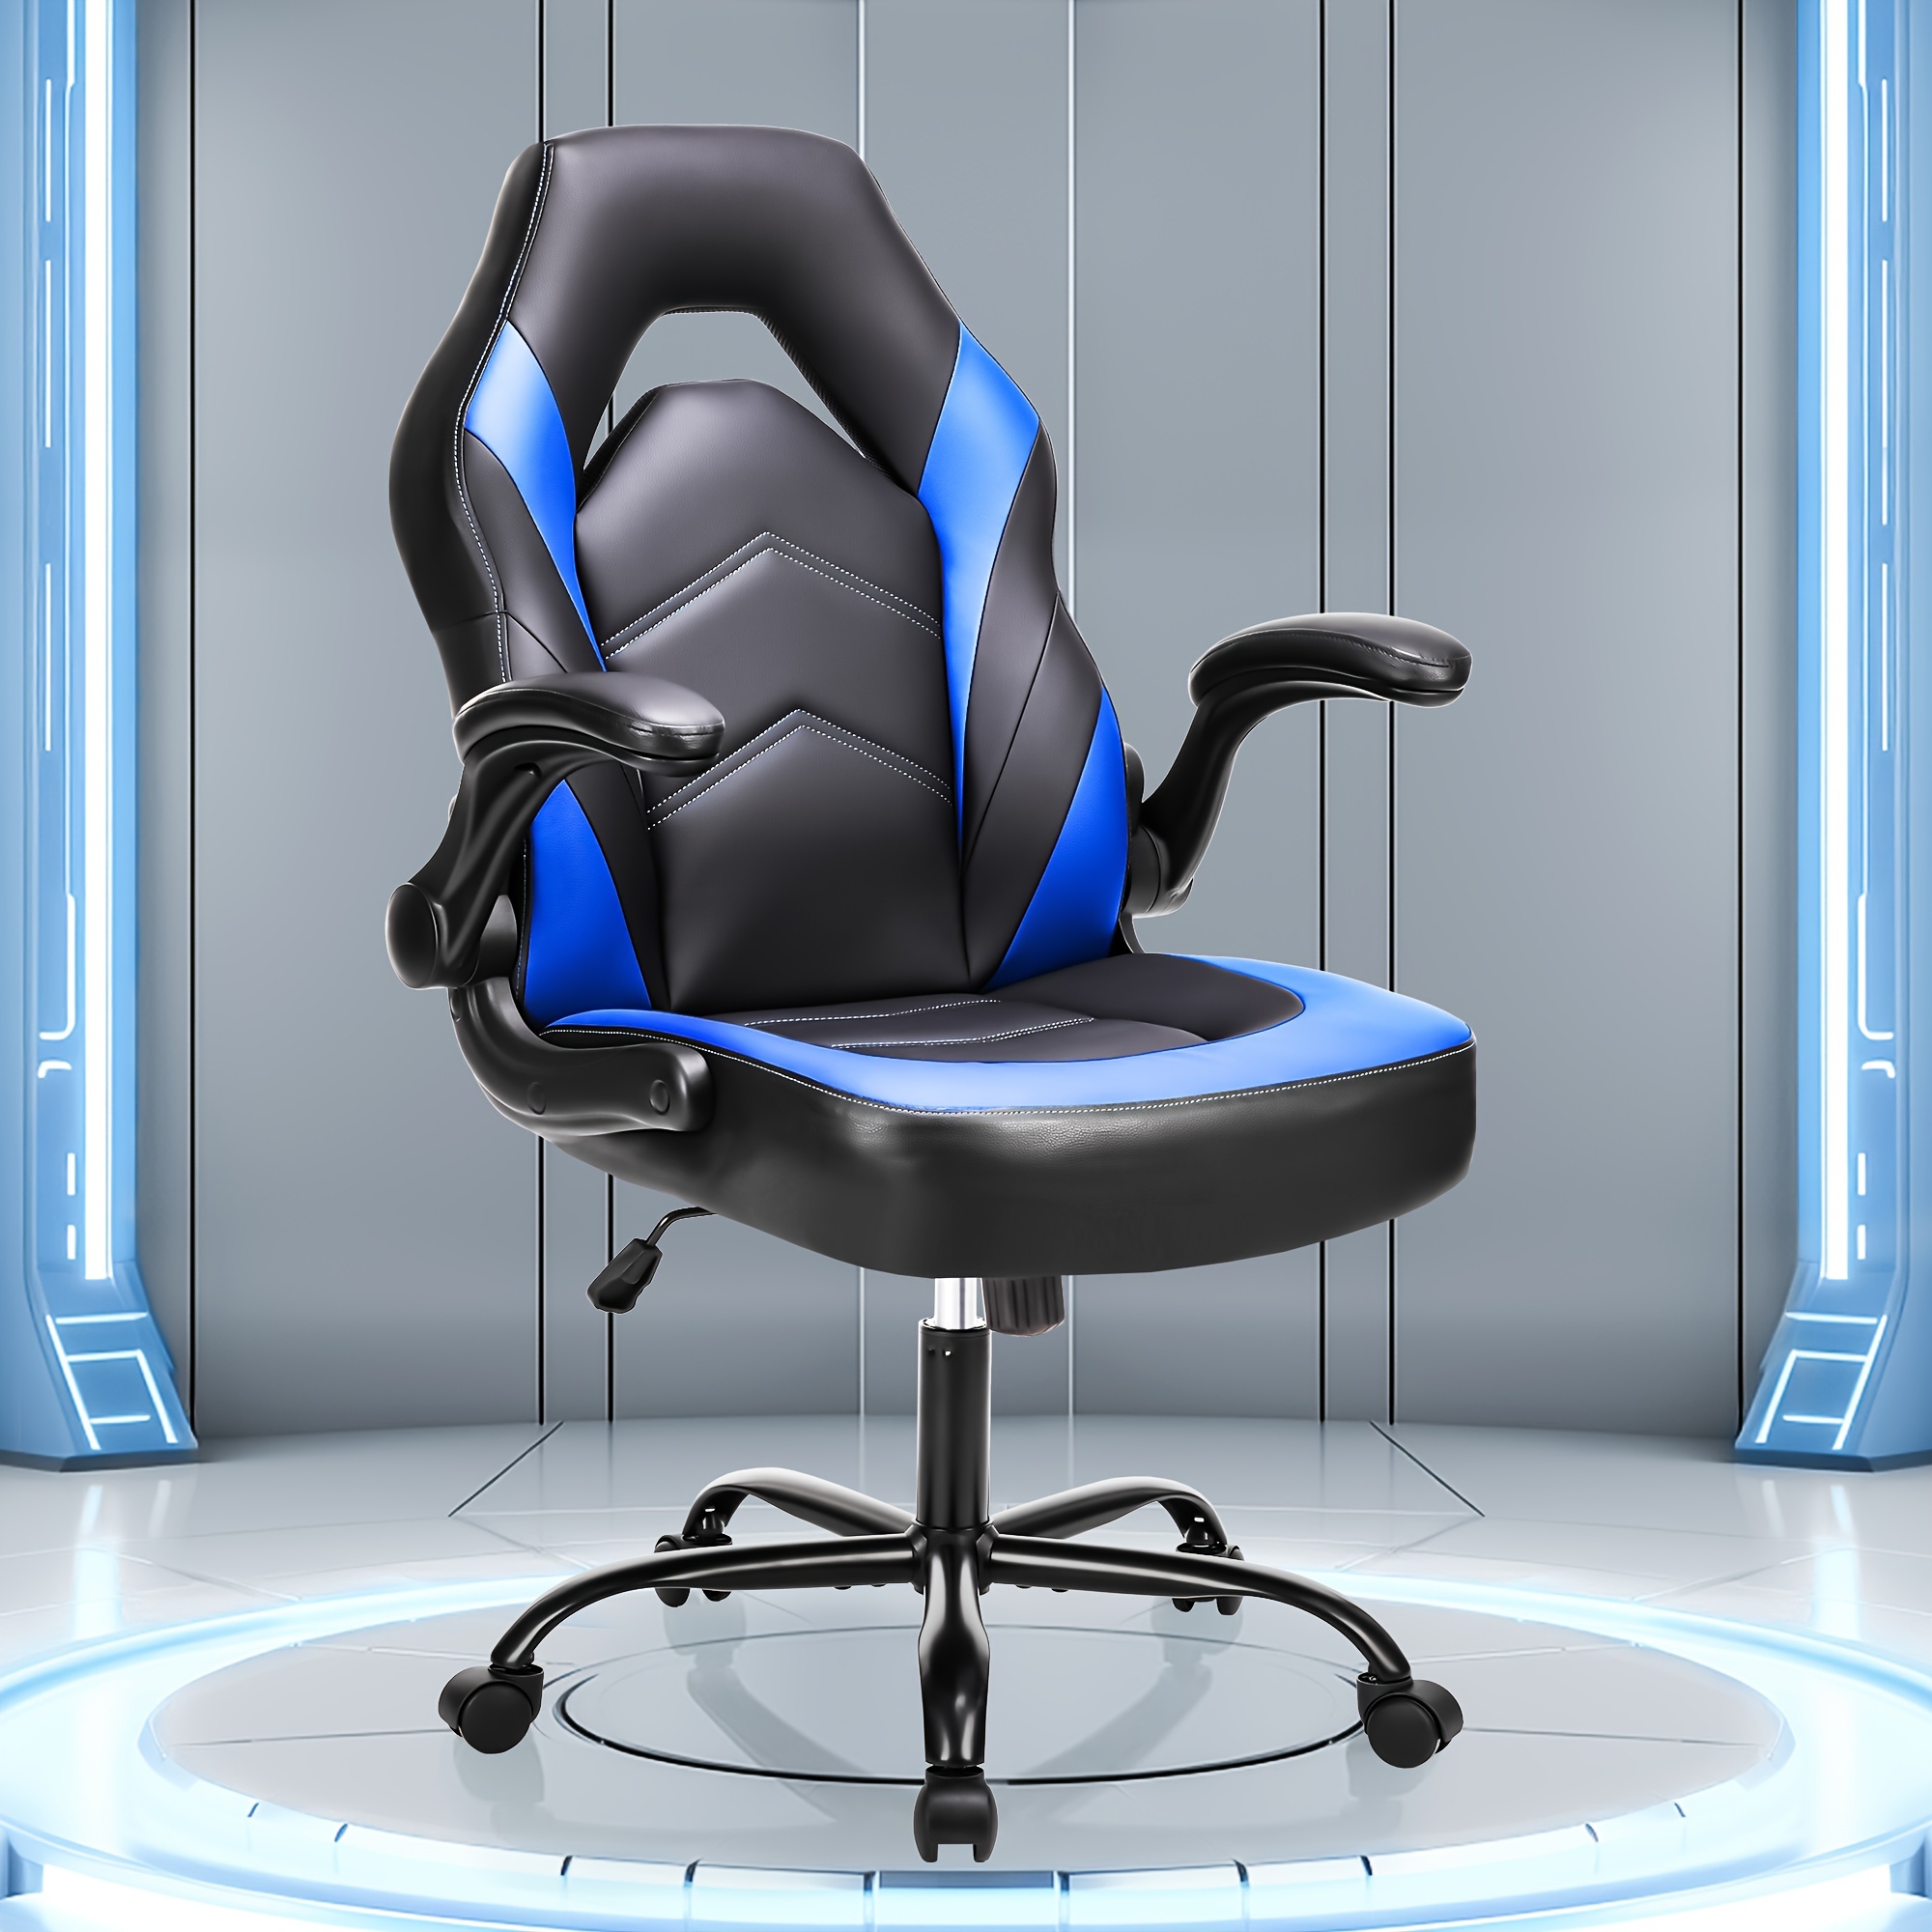 

Office Ergonomic Computer Gaming Desk Racing Chair For Adults, Flip-up Arms Adjustable Height Pu Leather Swivel With Wheels